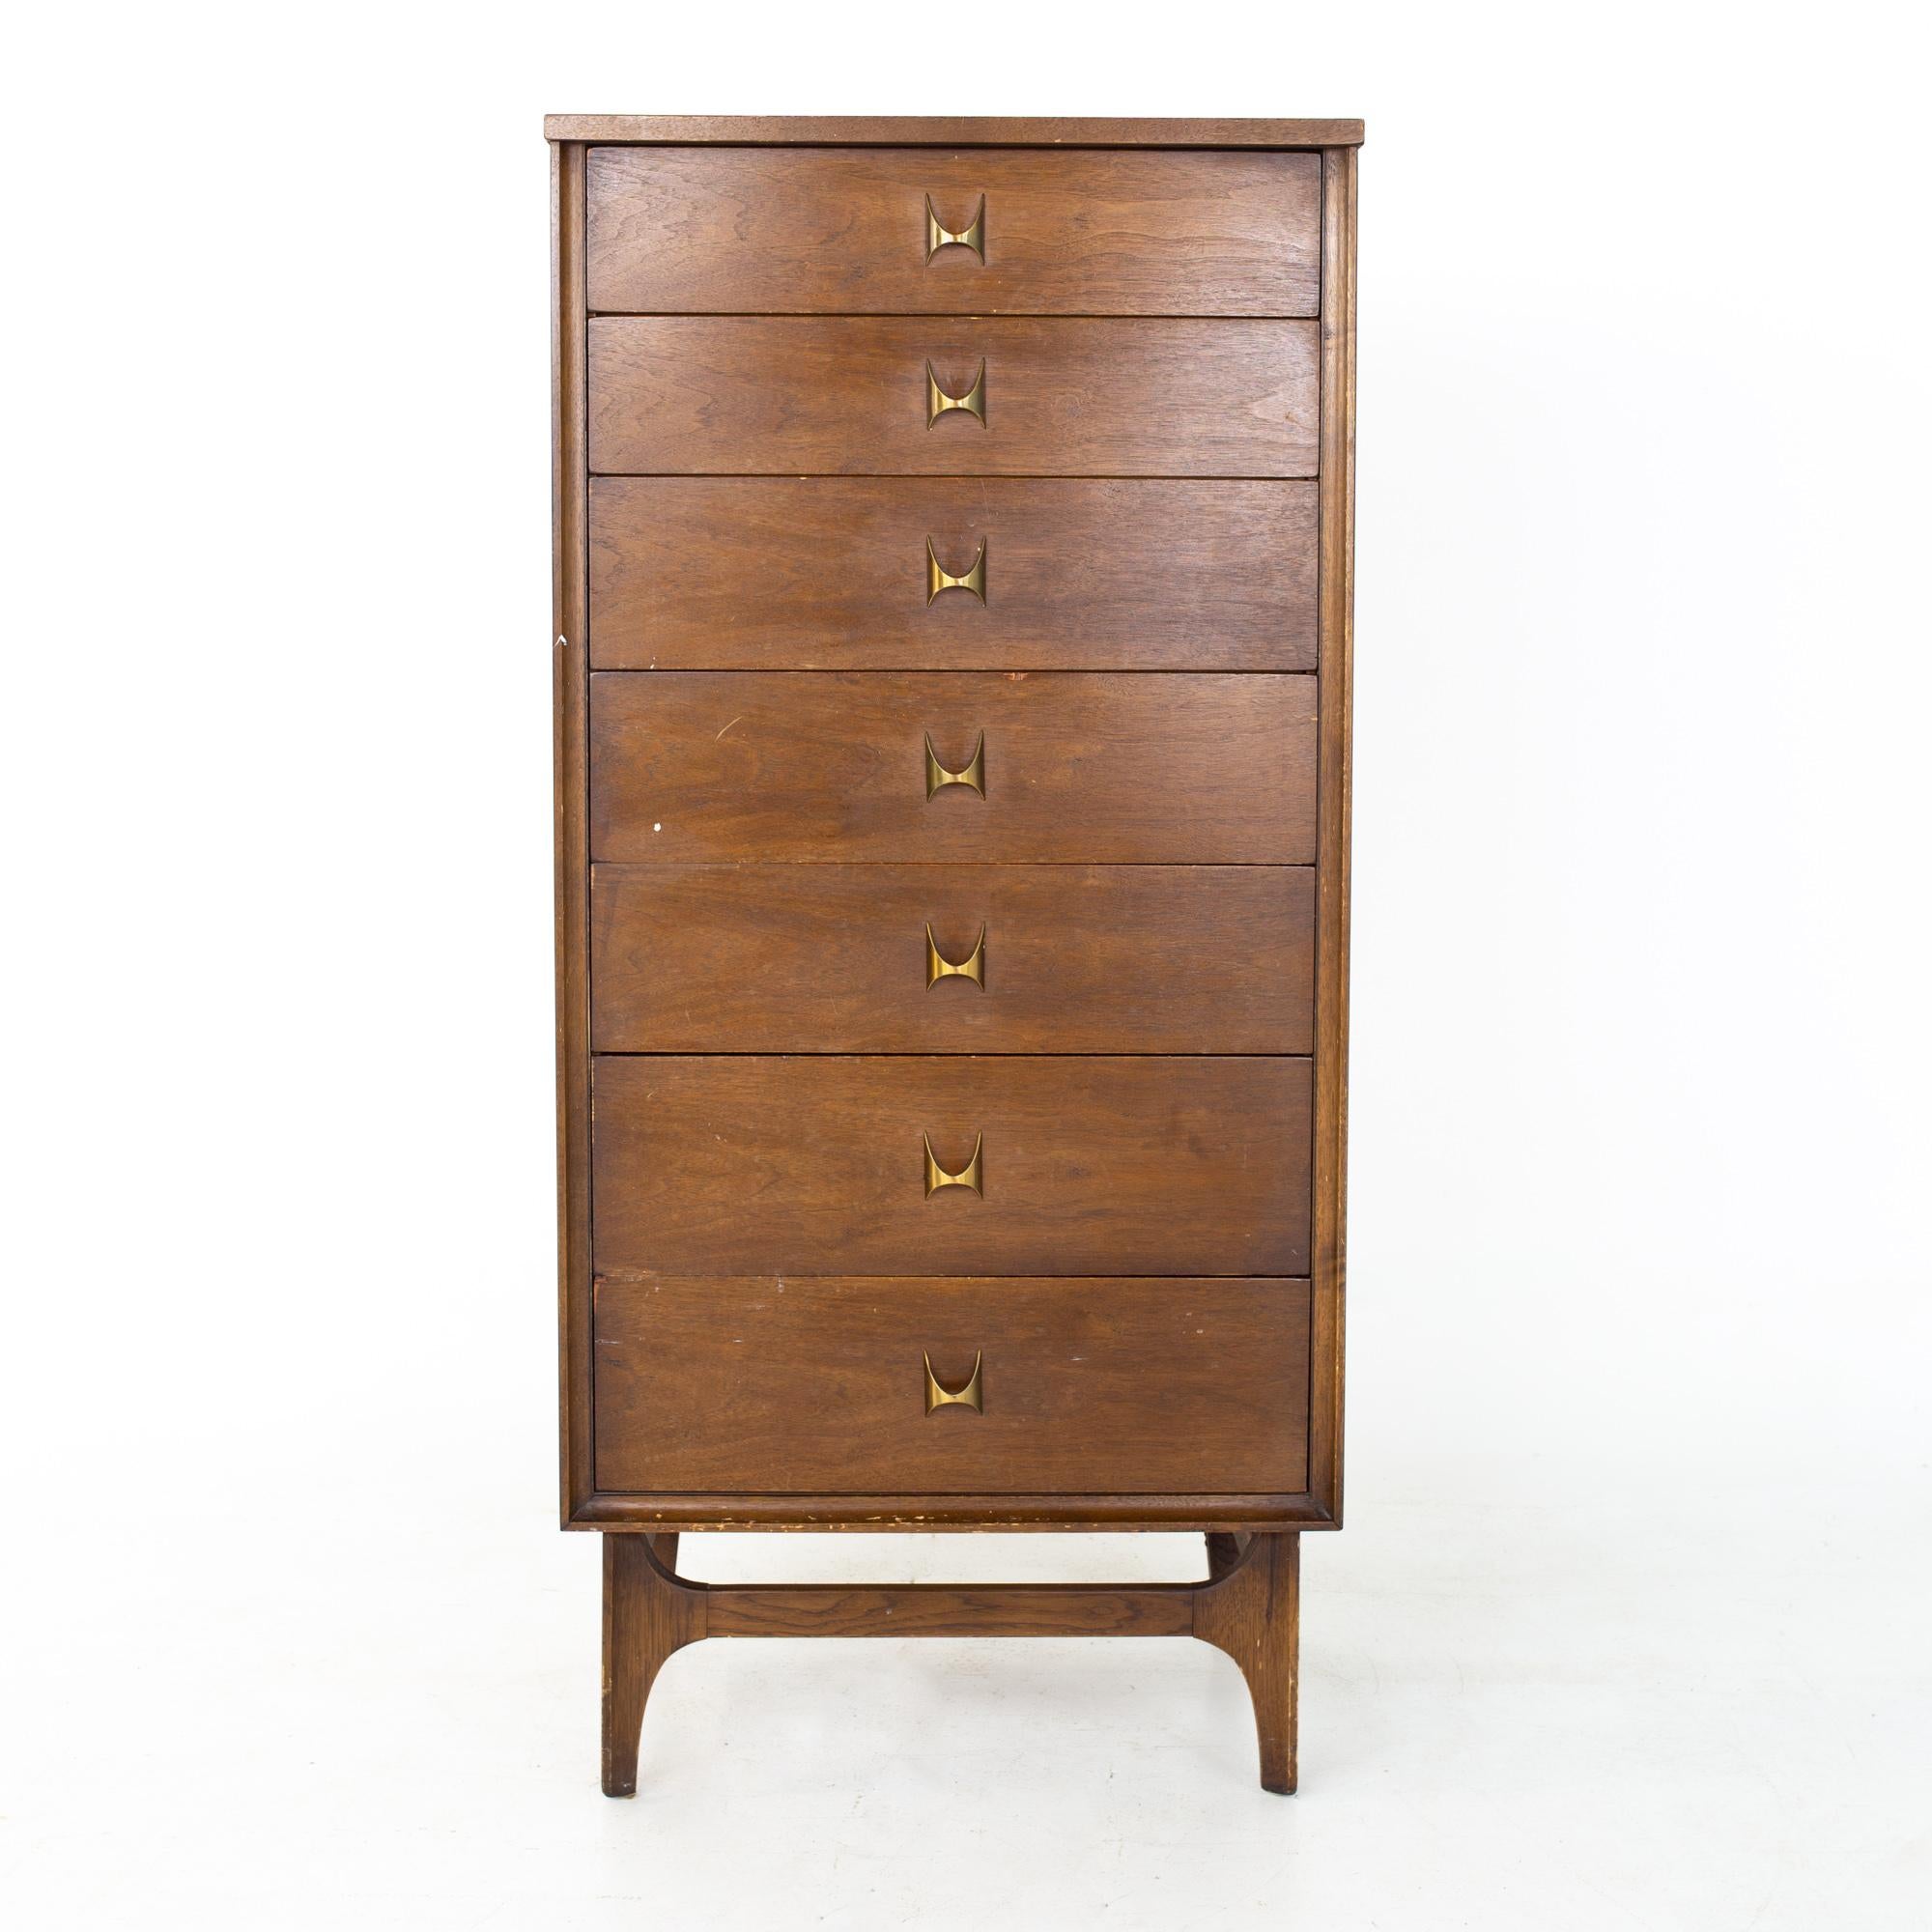 Broyhill Brasilia Brutalist mid century walnut and brass lingerie chest

Chest measures: 24 wide x 16 deep x 52 inches high

All pieces of furniture can be had in what we call restored vintage condition. That means the piece is restored upon